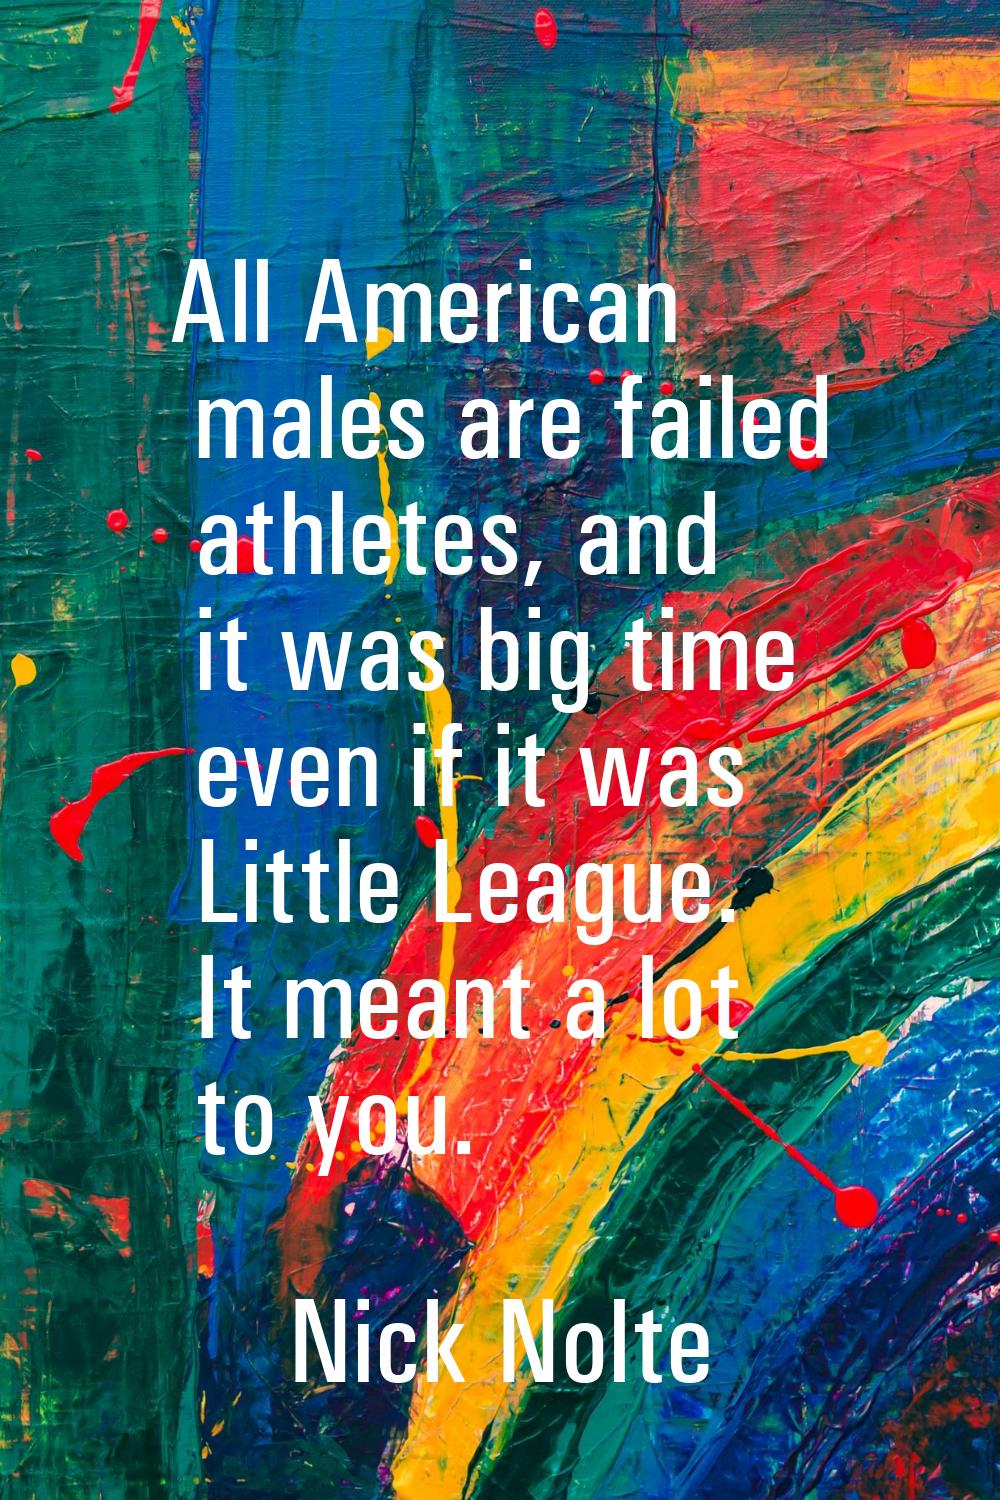 All American males are failed athletes, and it was big time even if it was Little League. It meant 